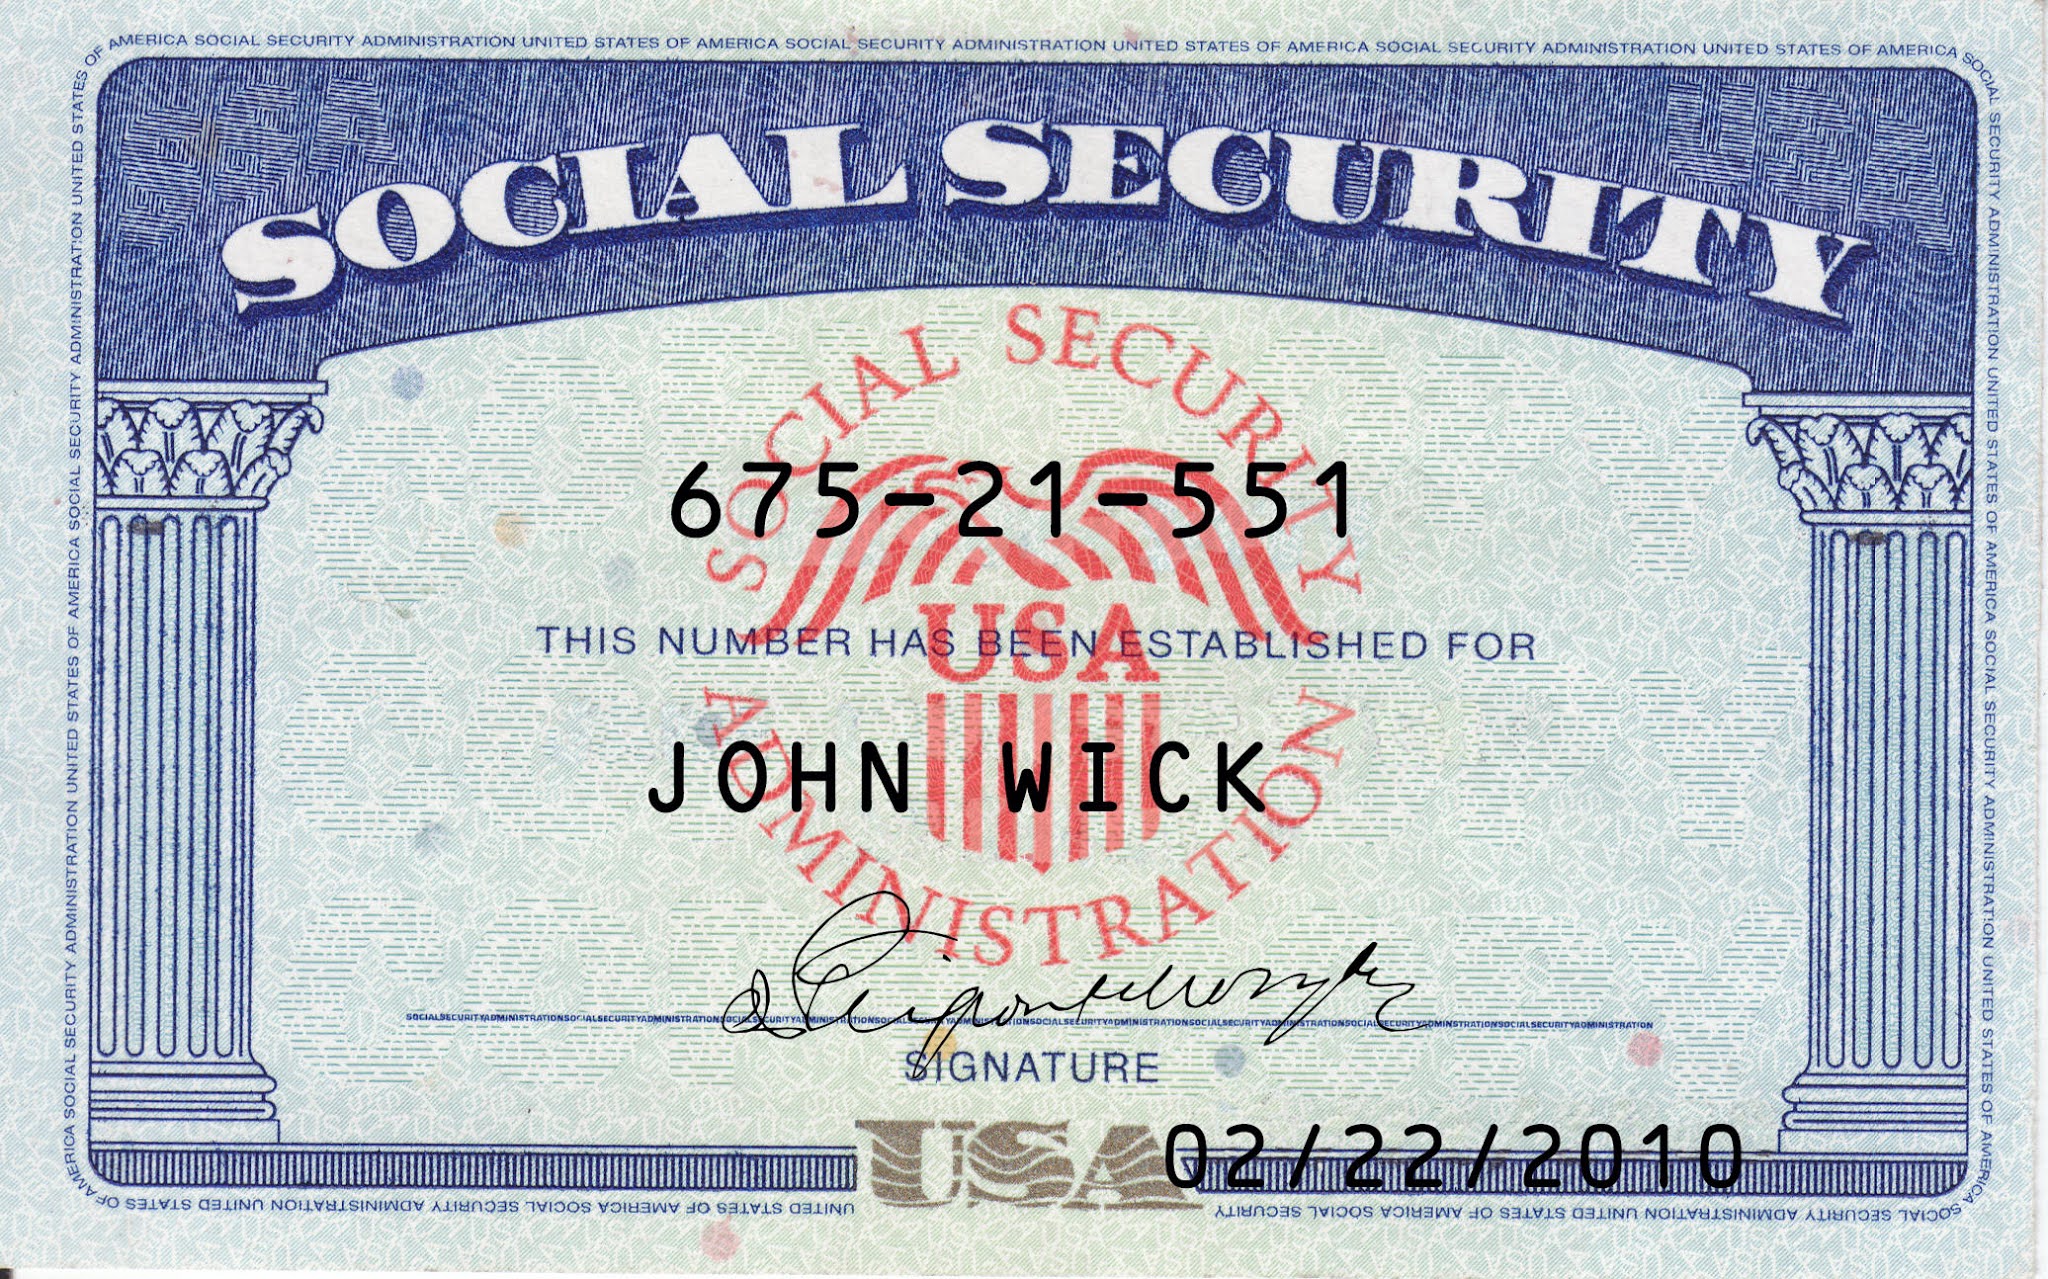 USA Social Security Card PSD Template US Novelty Drivers License